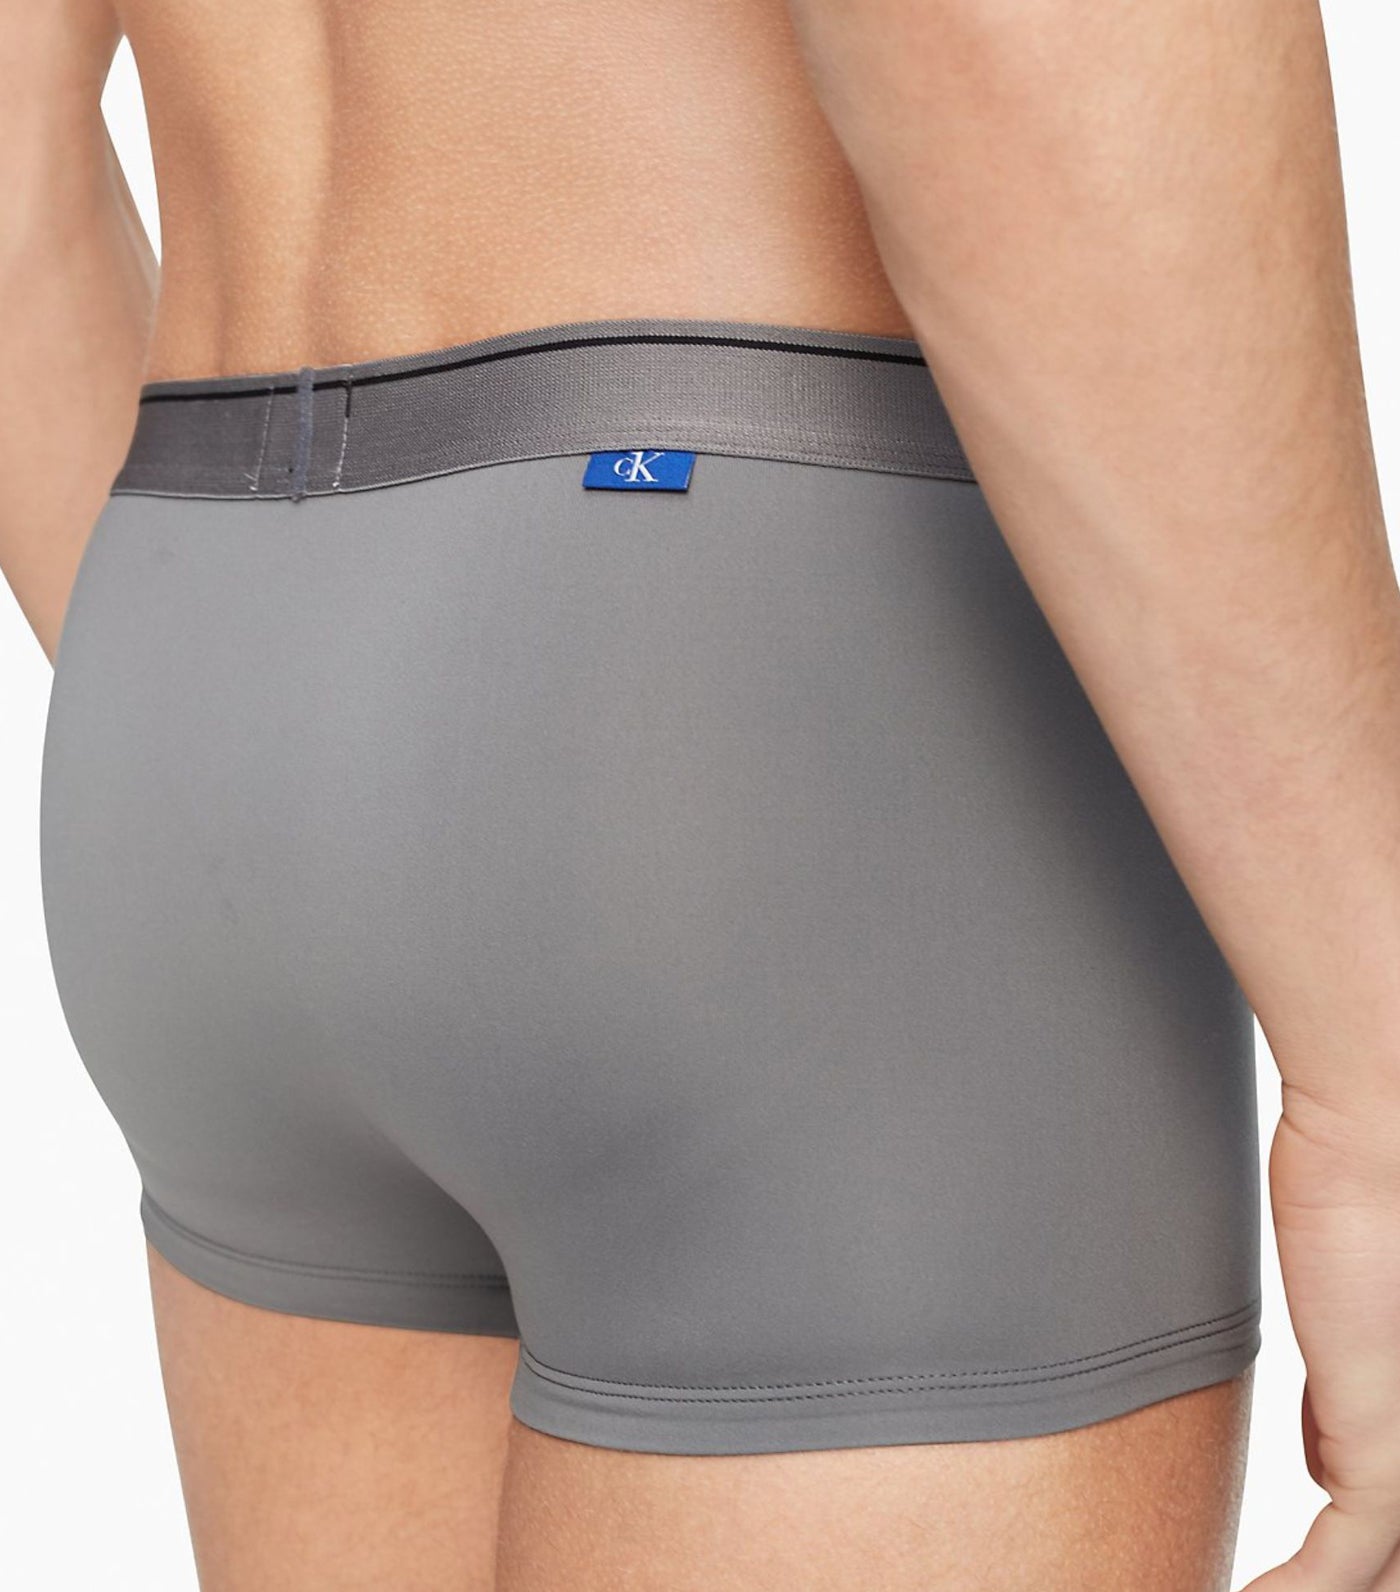 CK One Micro Low Rise Trunk Gray